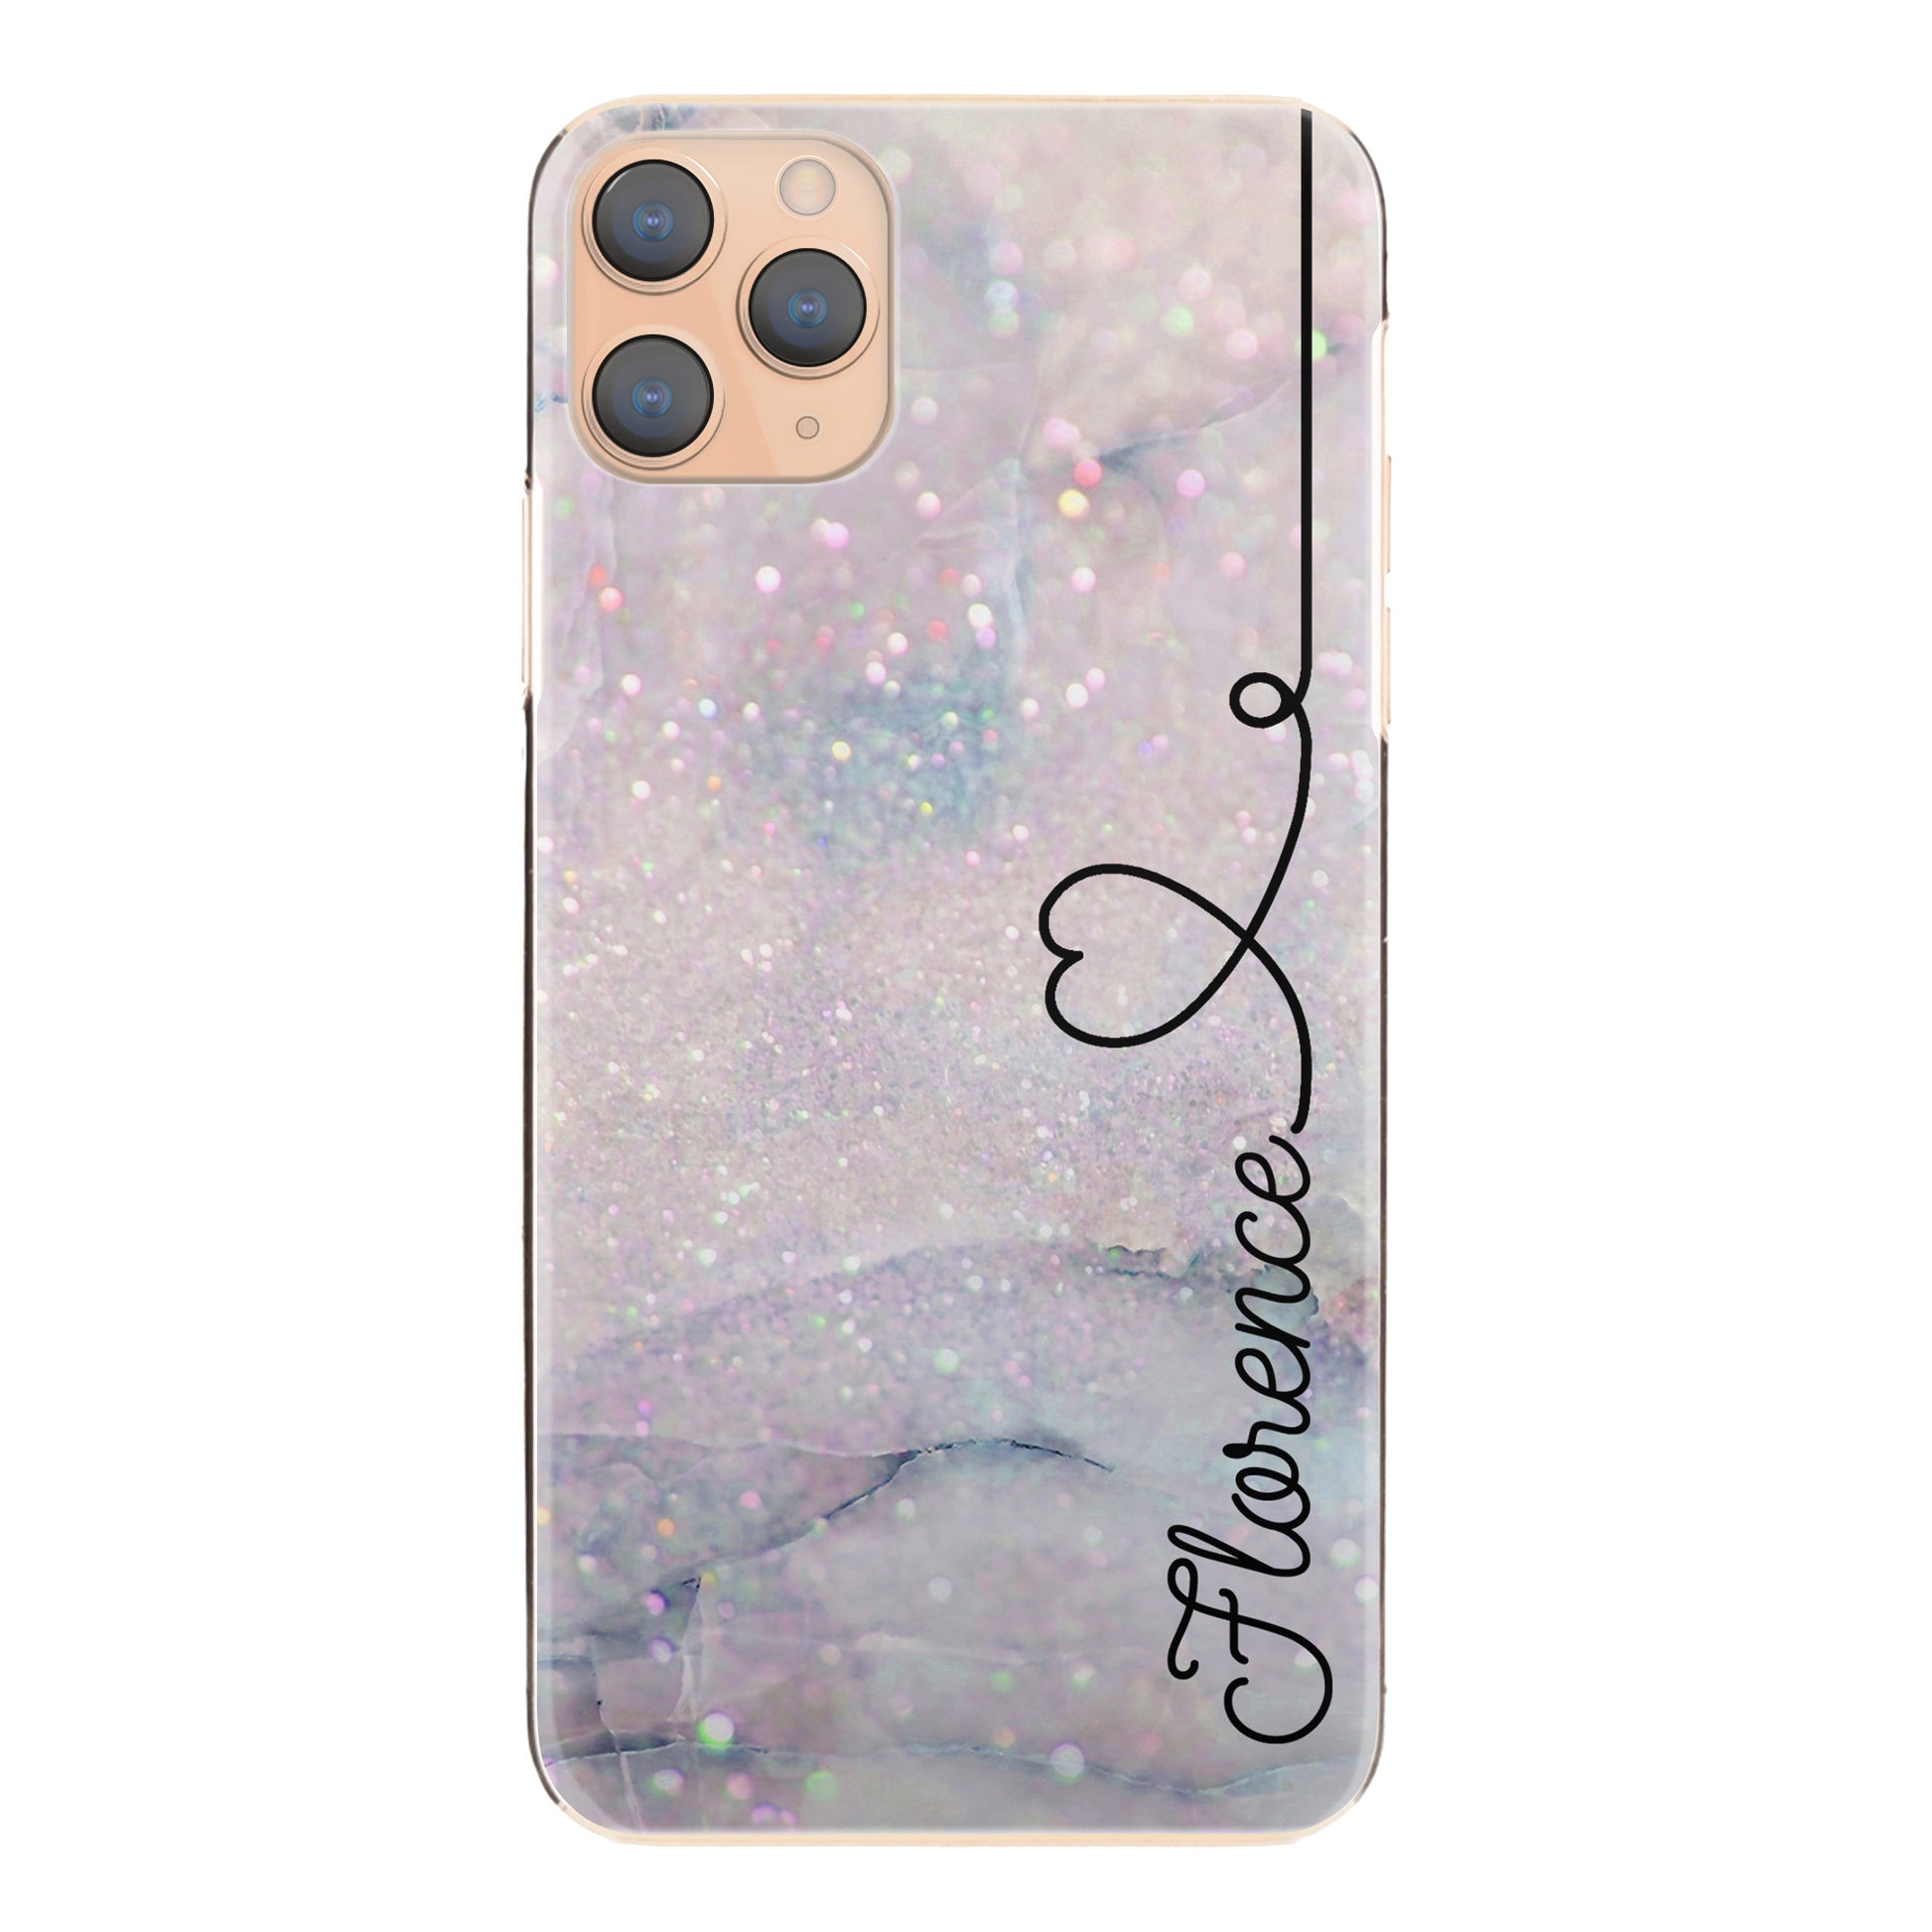 Personalised Honor Phone Hard Case with Stylish Text and Heart Line on Textured Glitter Effect